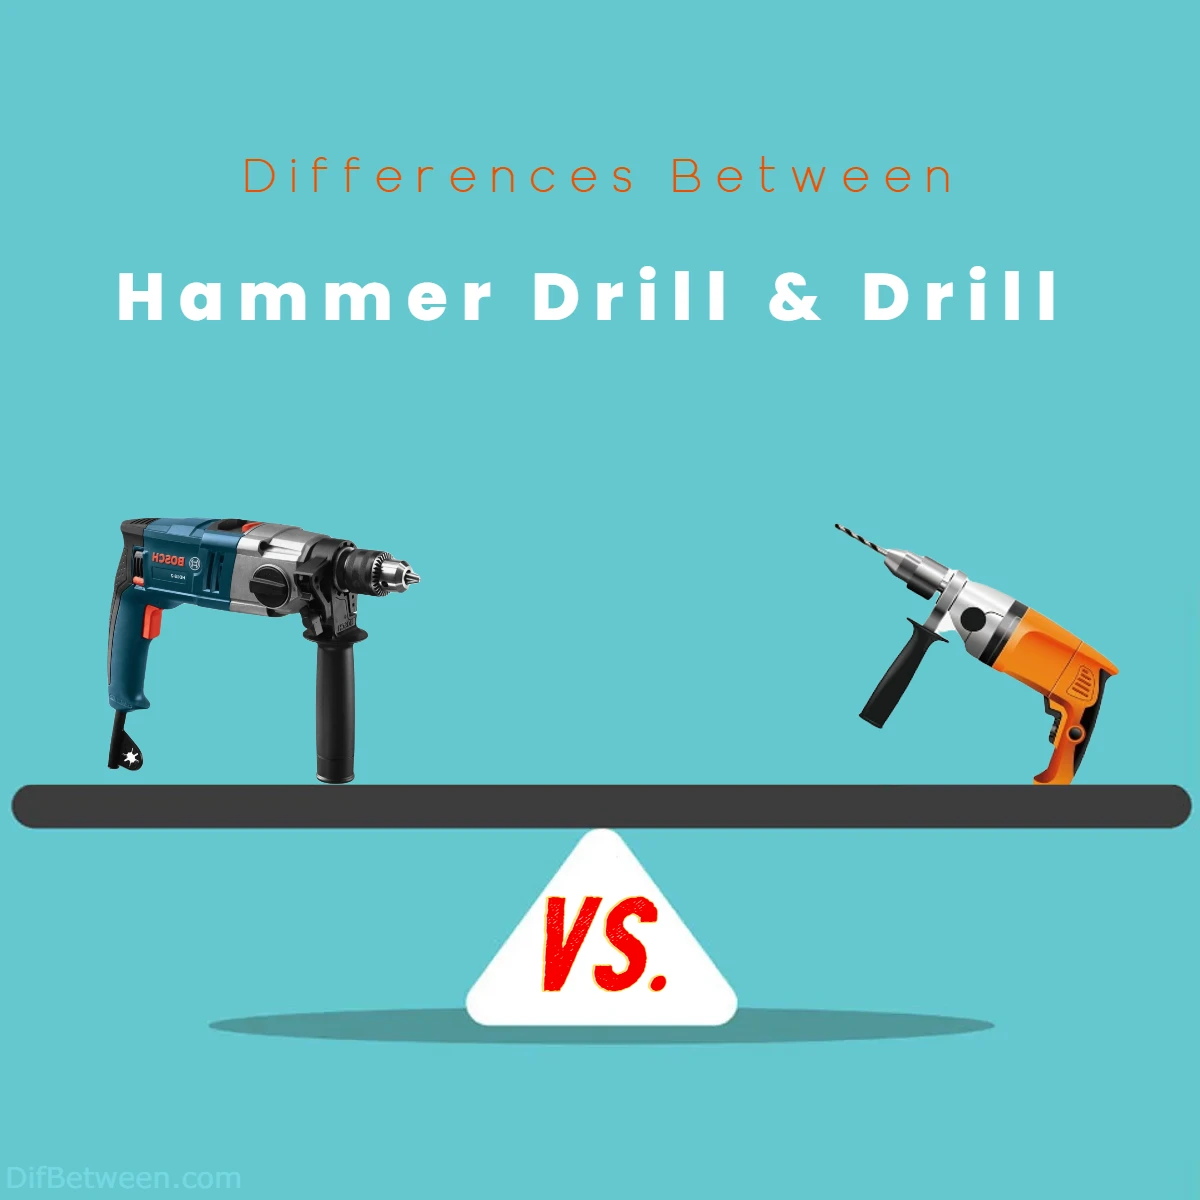 Differences Between Hammer Drill or Drill